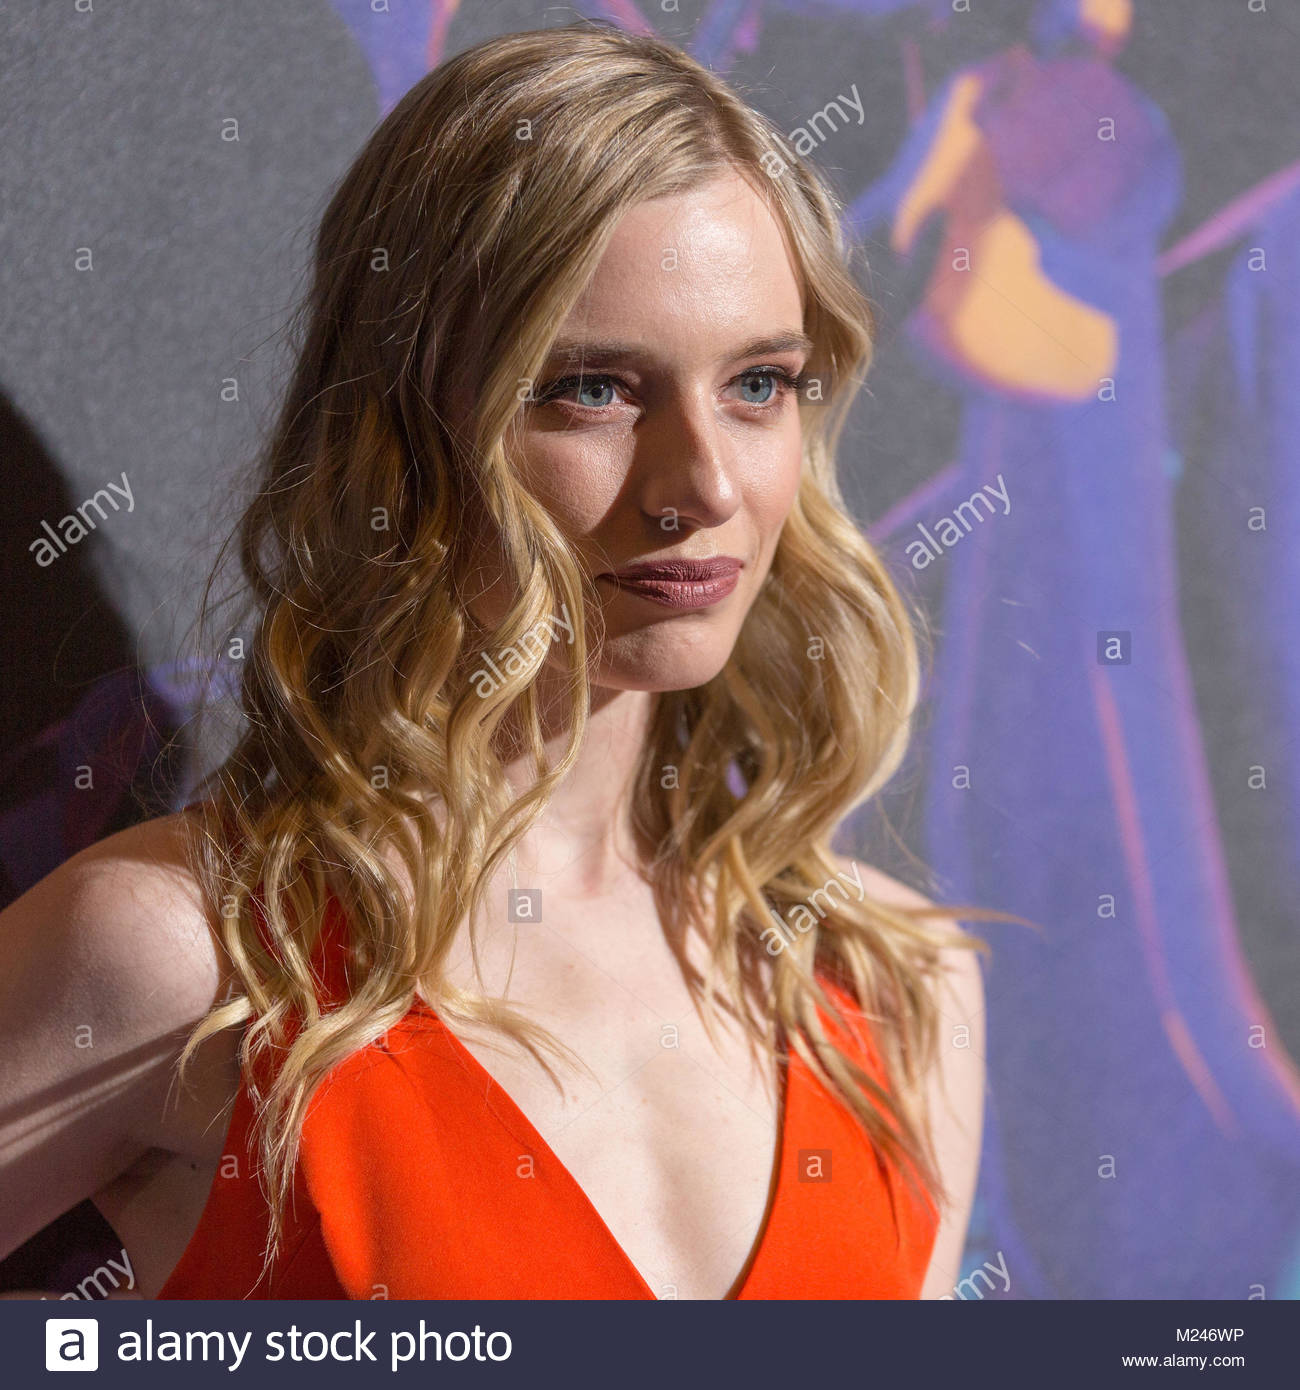 Red carpet premiere event for AT&T Audience Network's 'Loudermilk' and 'Hit  The Road' at Arclight Hollywood - Arrivals Featuring: Anja Savcic Where:  Los Angeles, California, United States When: 10 Oct 2017 Credit: